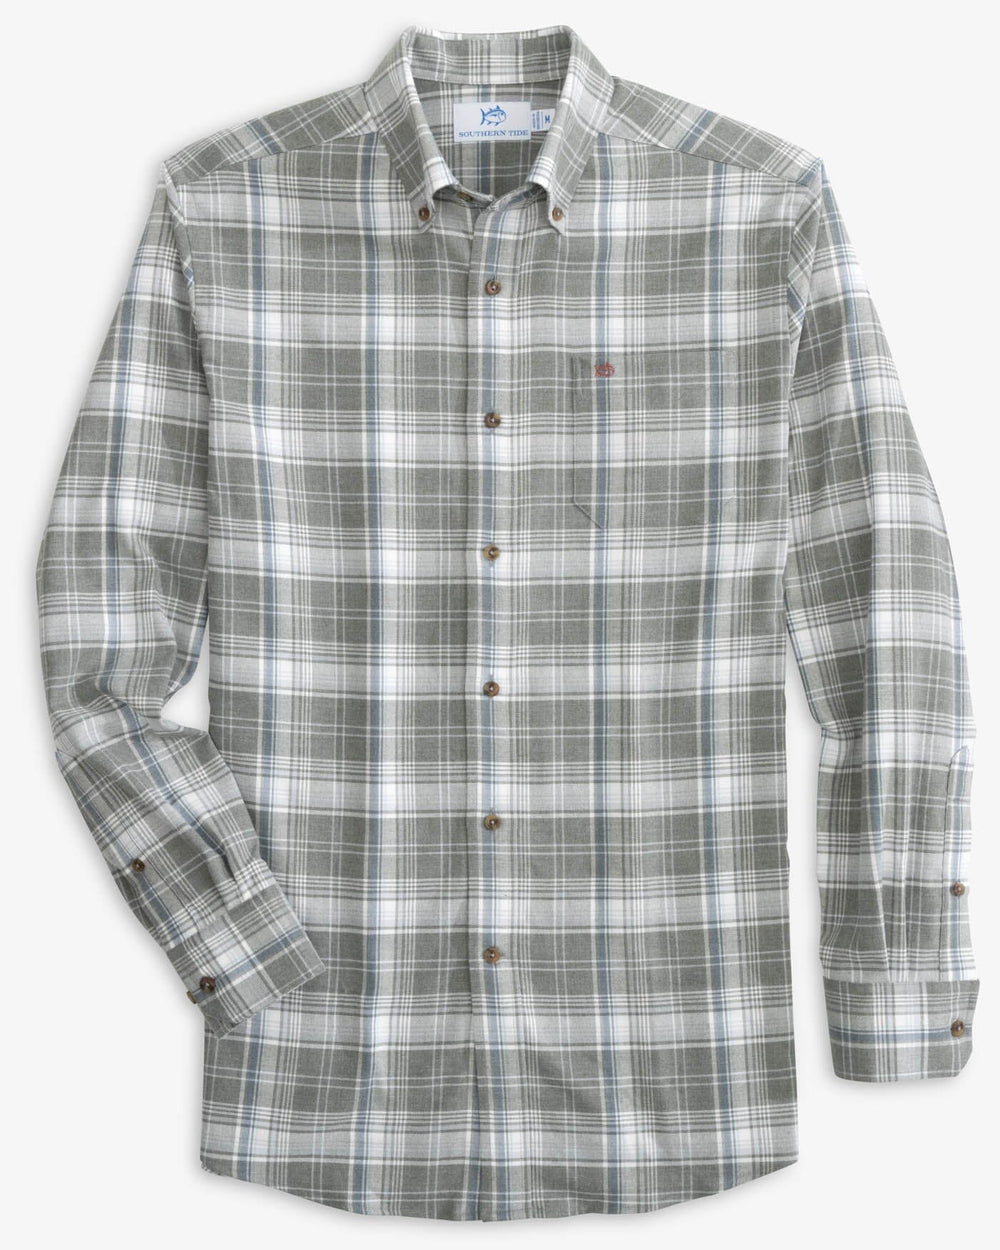 The back view of the Southern Tide Heather Longleaf Plaid Intercoastal Flannel Sport Shirts by Southern Tide - Heather Shadow Grey